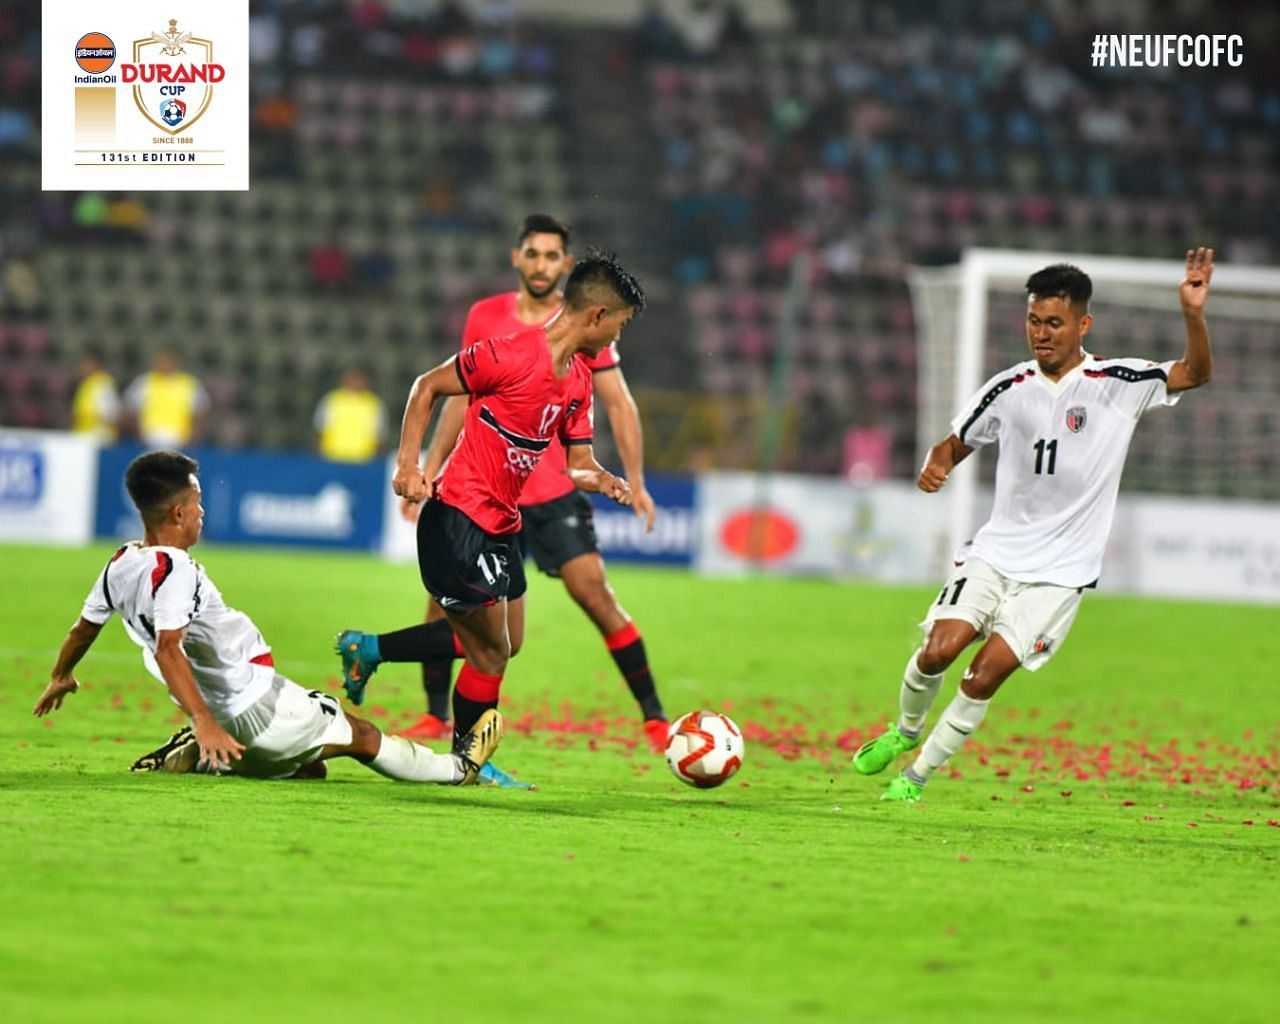 Odisha FC picked up an impressive win against NorthEast United FC in the Durand Cup. [Credits: Durand Cup Twitter]